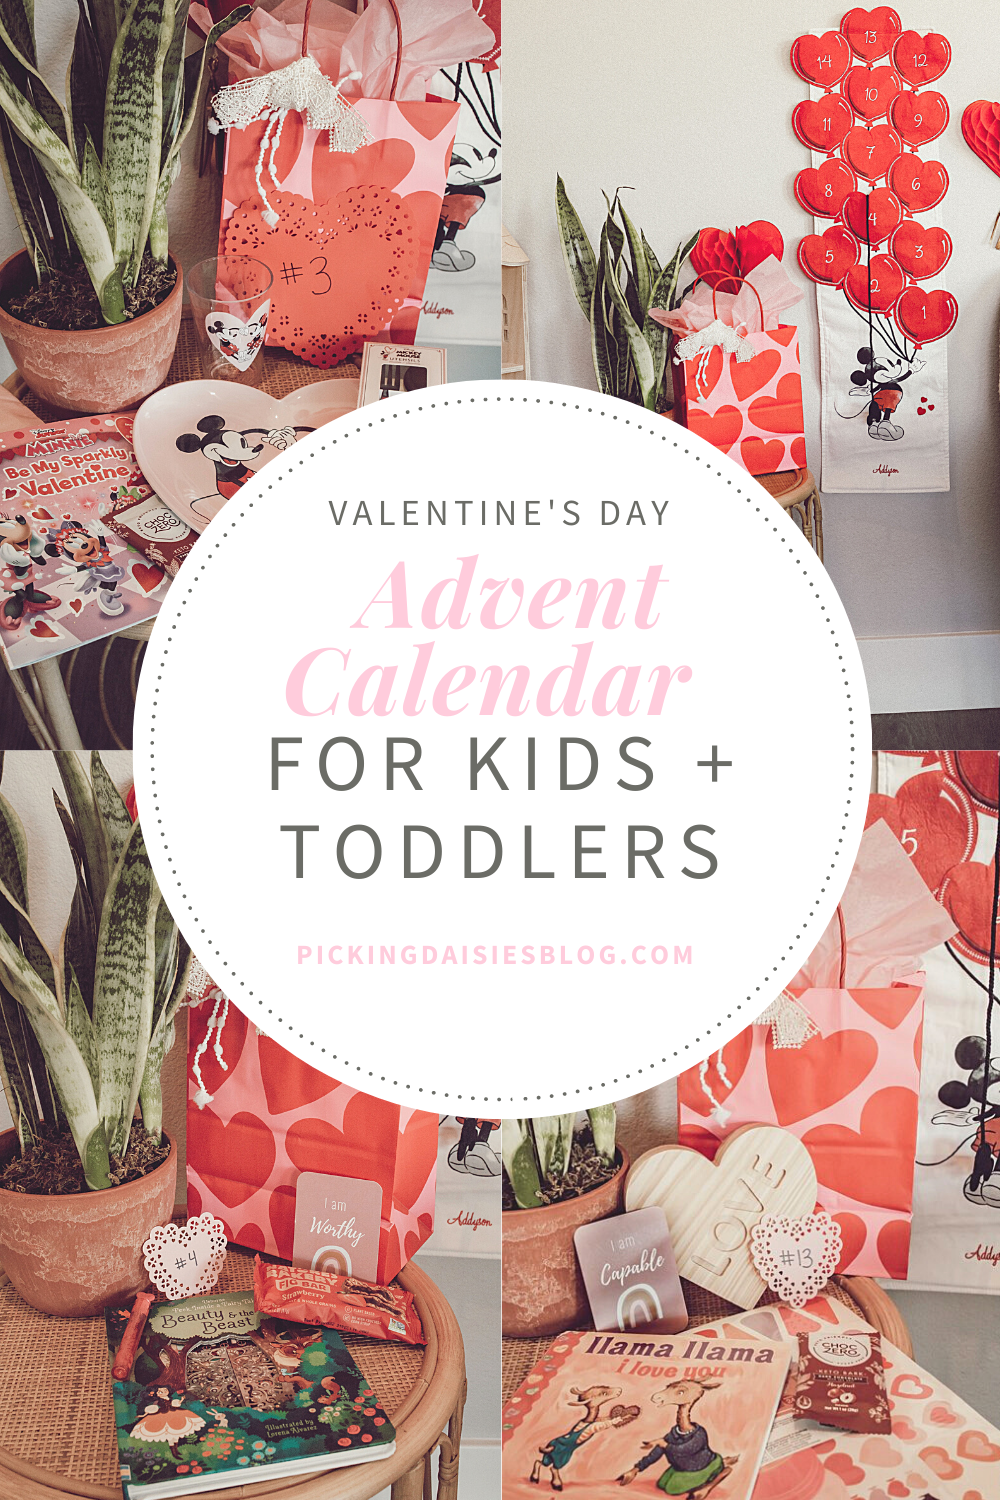 Picking Daisies Blog Valentine's Day Advent Calendar for Kids and Toddlers